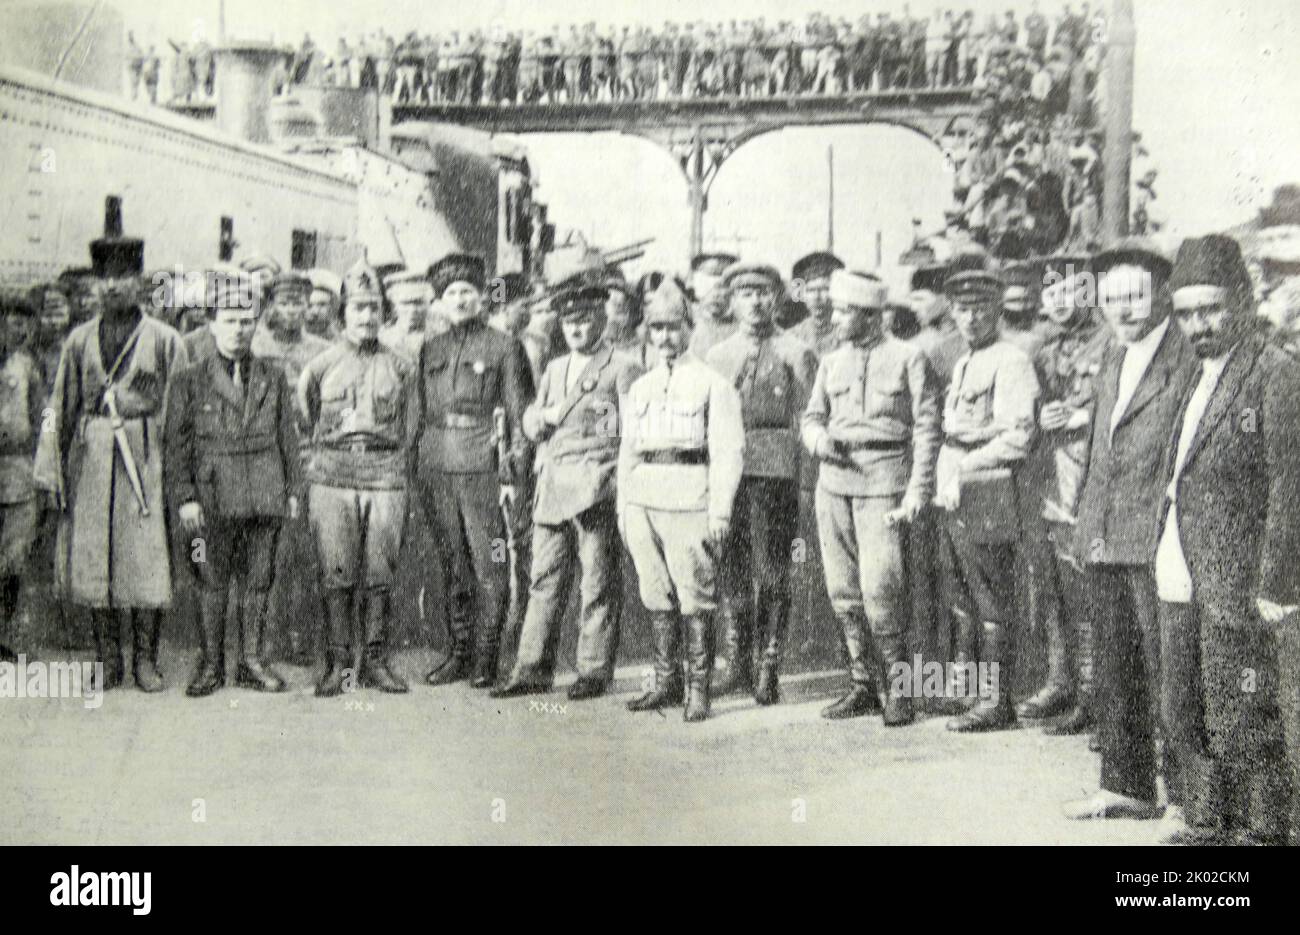 S.M.Kirov , A.I.Mikoyan, G.K. Ordzhonikidze M.K. Levandovskiy, among Red Army soldiers and commanders of the 11th army at a train station in Baku. May, 1920.&#13;&#10; Stock Photo